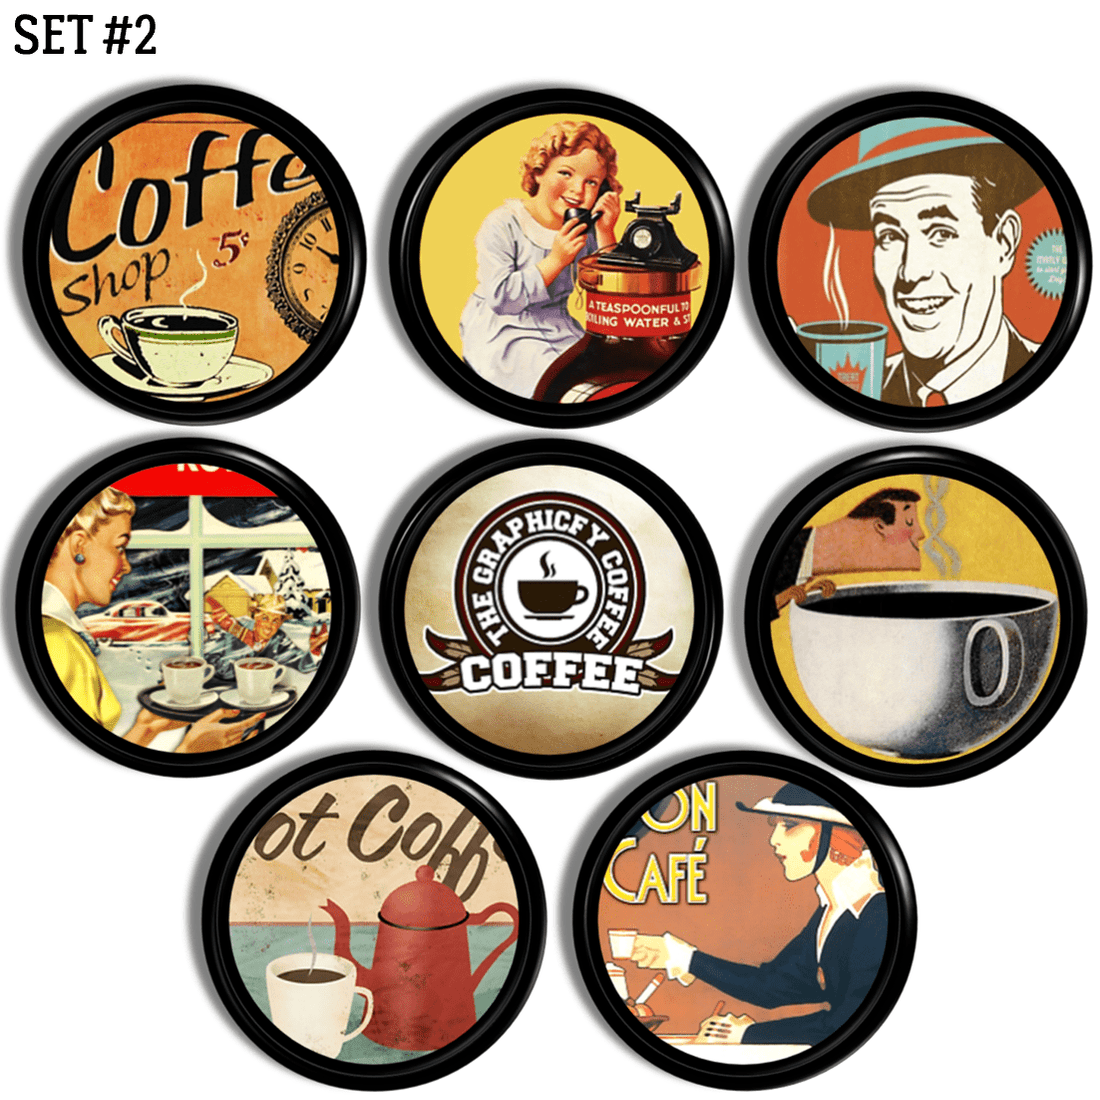 Bistro coffee shop cabinet drawer pulls. Barista bar cupboard handles in earthy brown, gold, red and orange colored vintage advertisements.